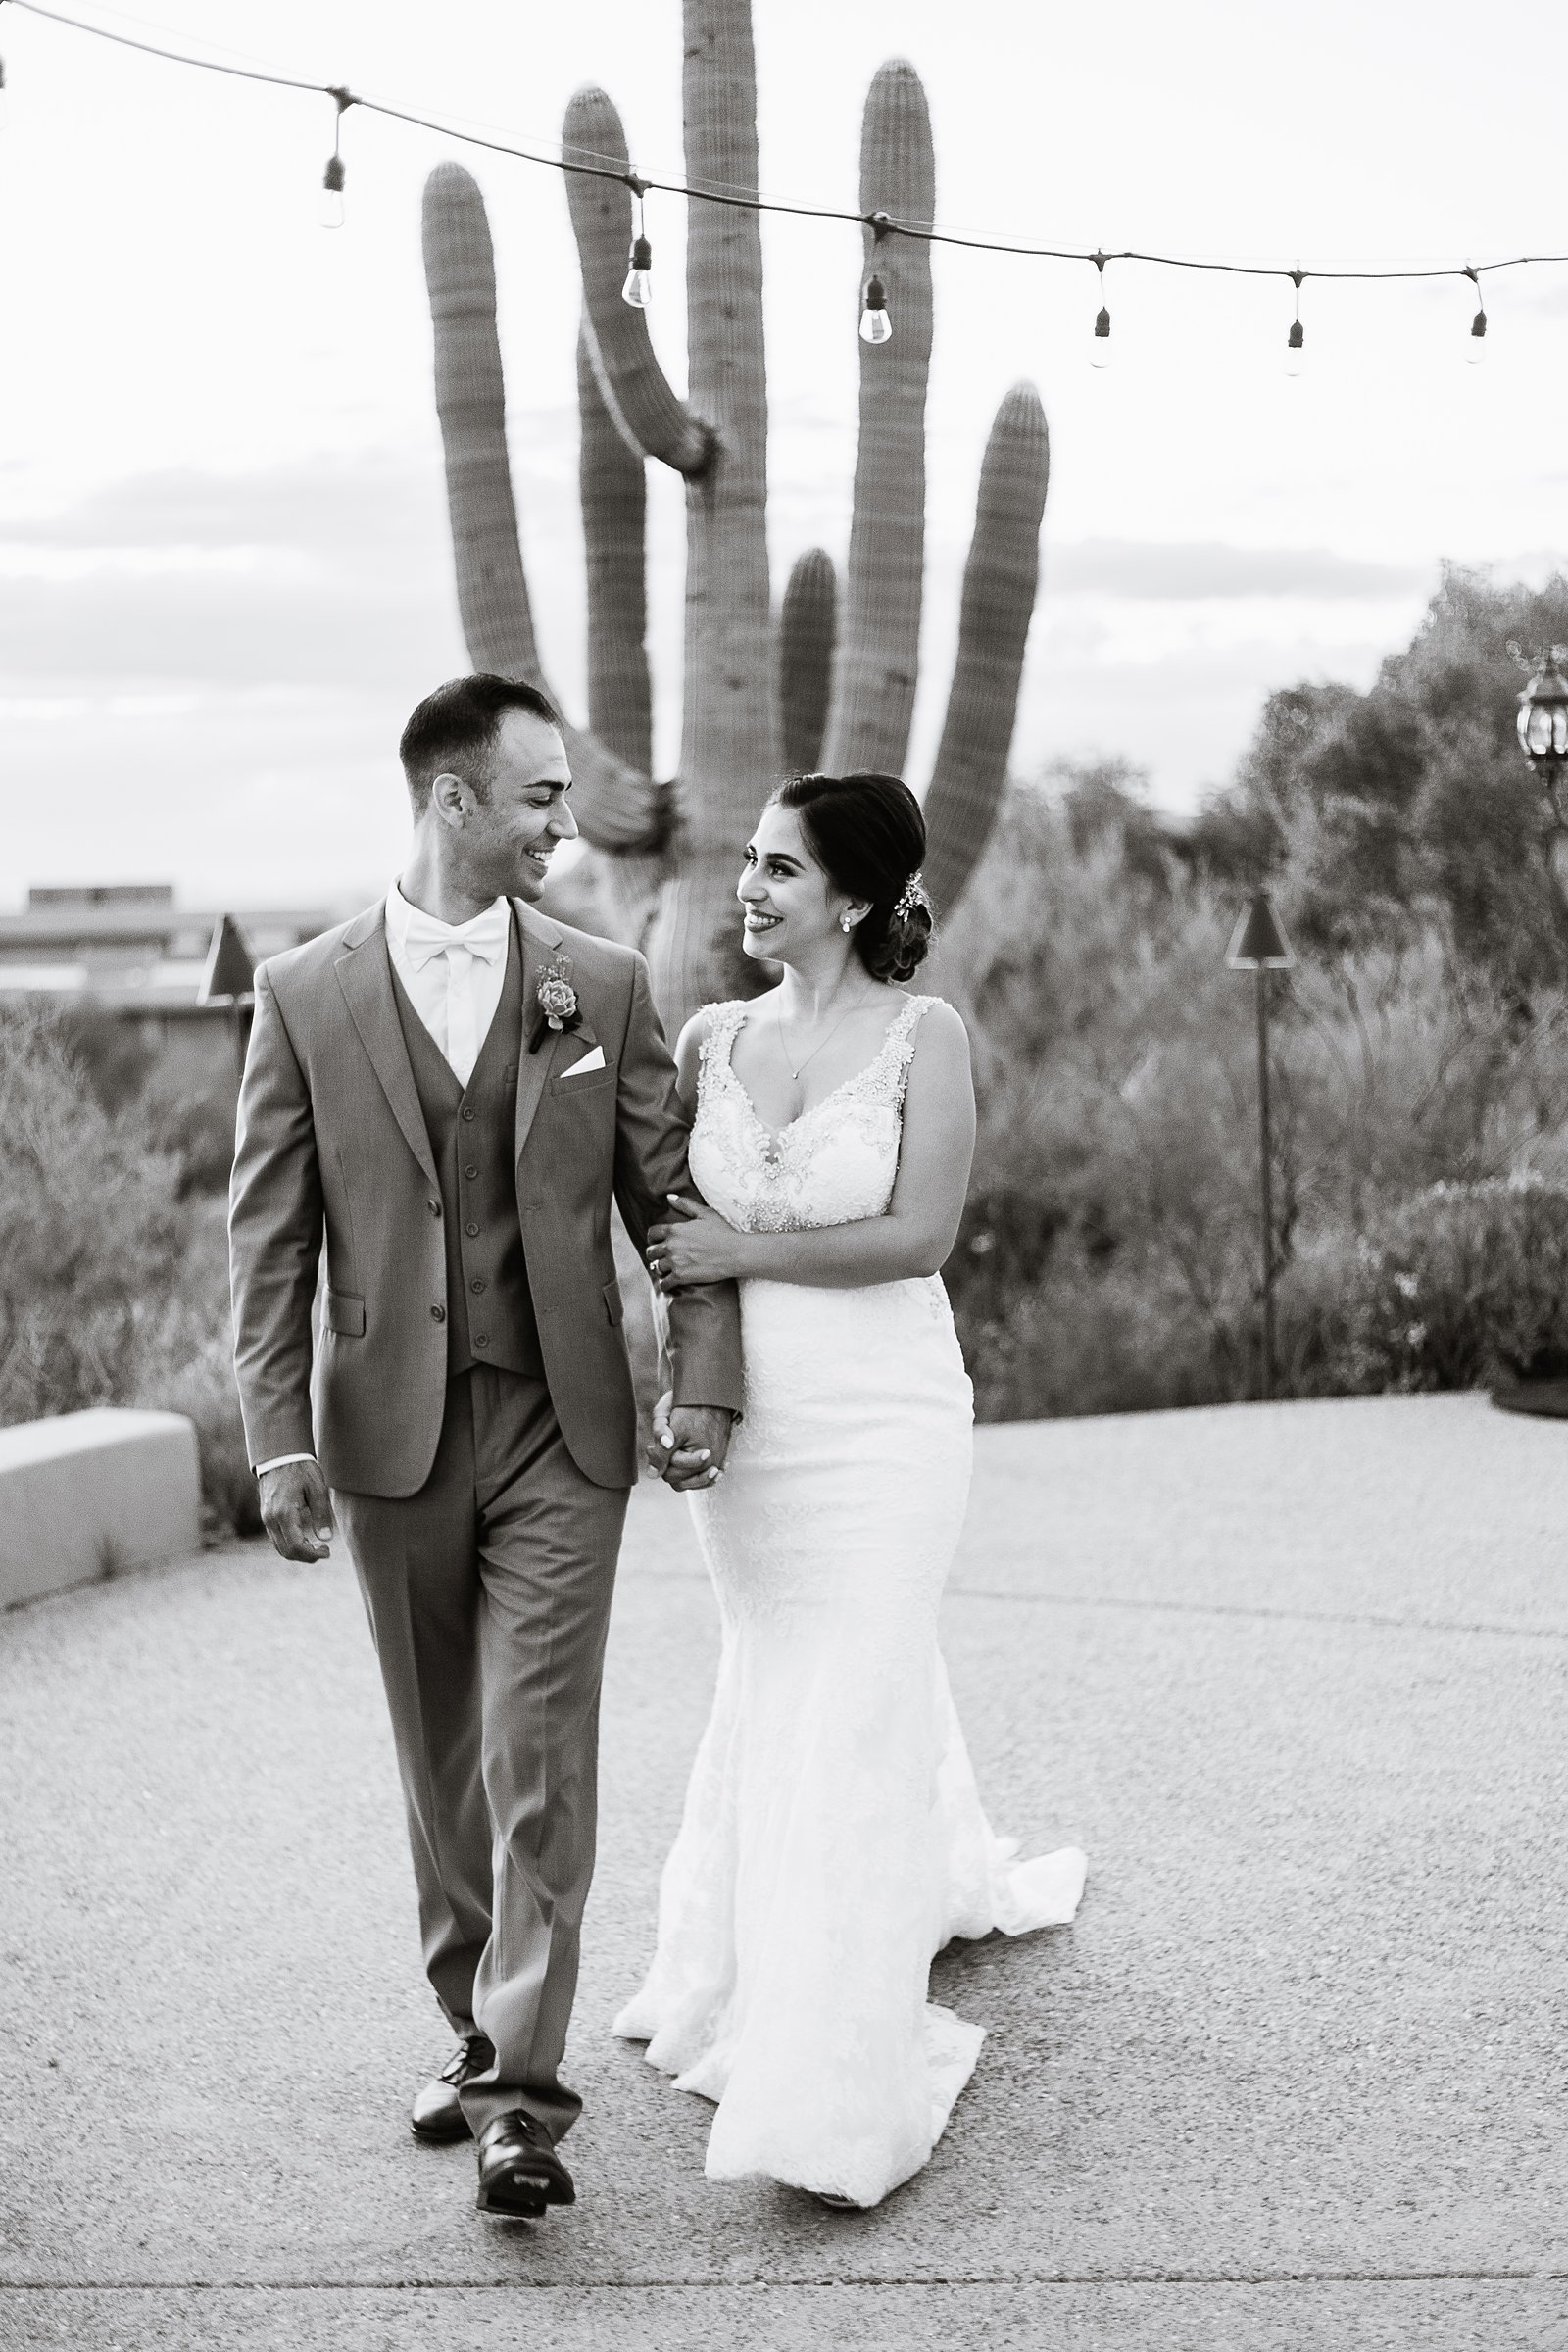 Bride and groom walking together during their Troon North wedding by Arizona wedding photographer PMA Photography.